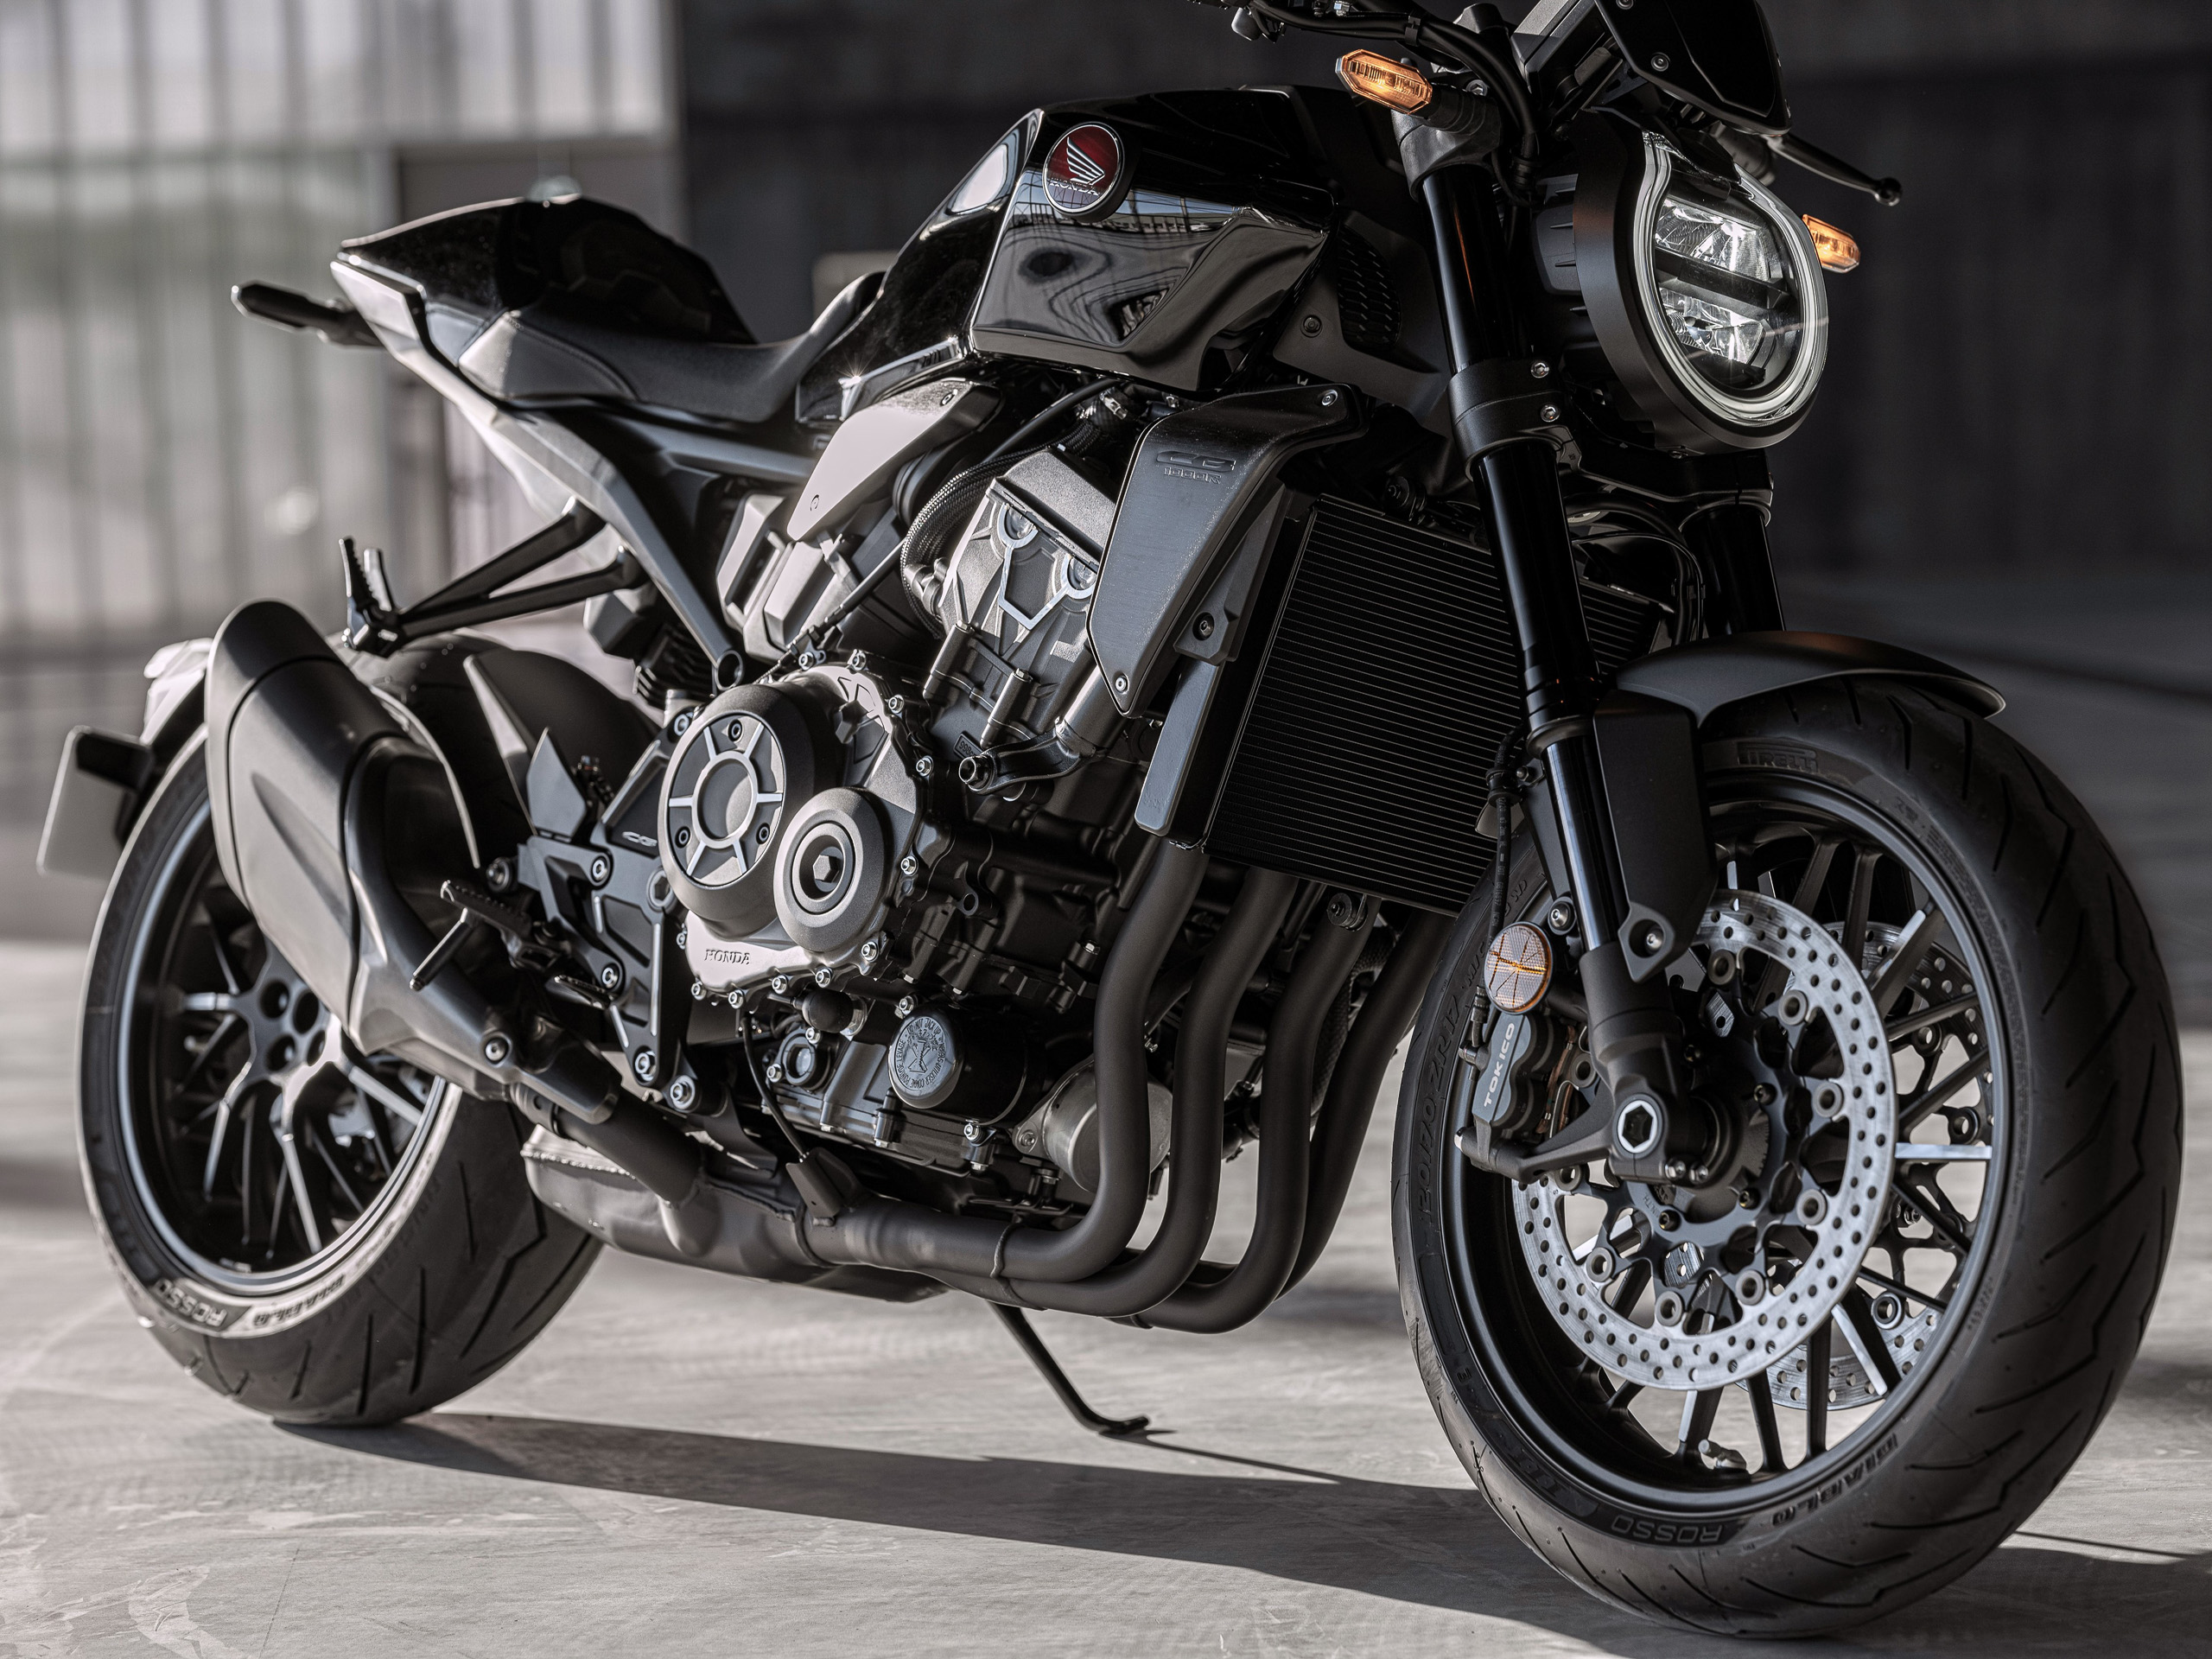 2021 Honda CB1000R model update – now comes with LCD screen, new wheels